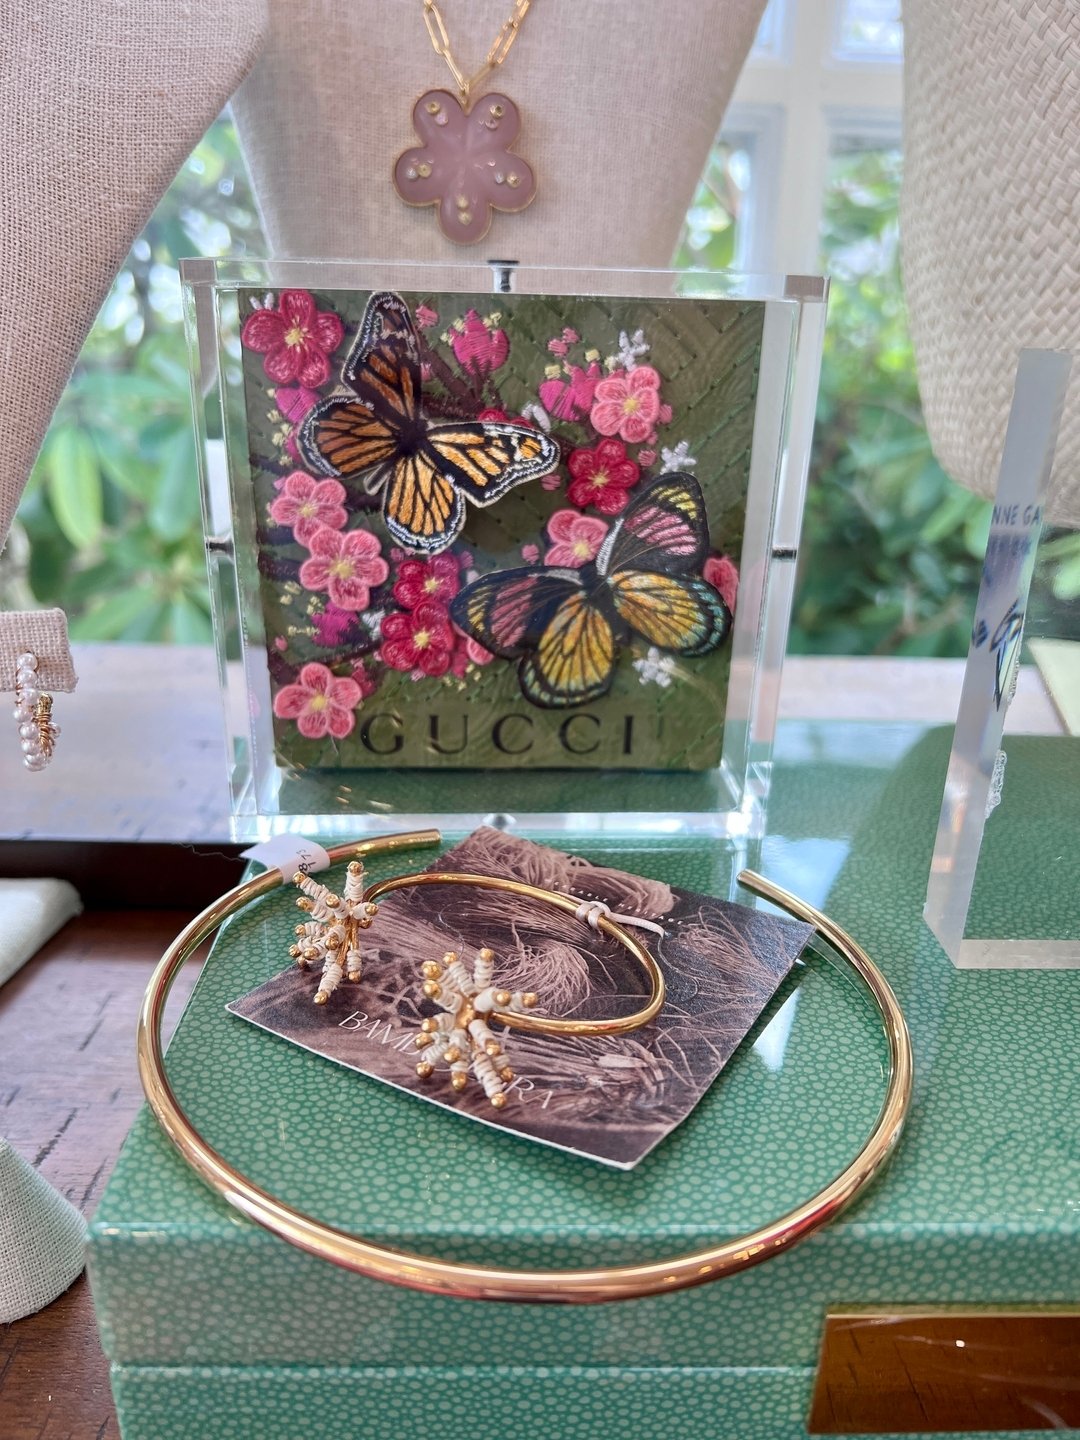 Fun new things arriving daily! Come see these new pieces and so much more in the shop. 👜🖼️☀️

#hamiltongracedesigns #shopmelange #shoposterville #osterville #shopthecape #capecod #jewelry #jewelrydesigner #bagsbagsbags #handbags #custommade #jewelr